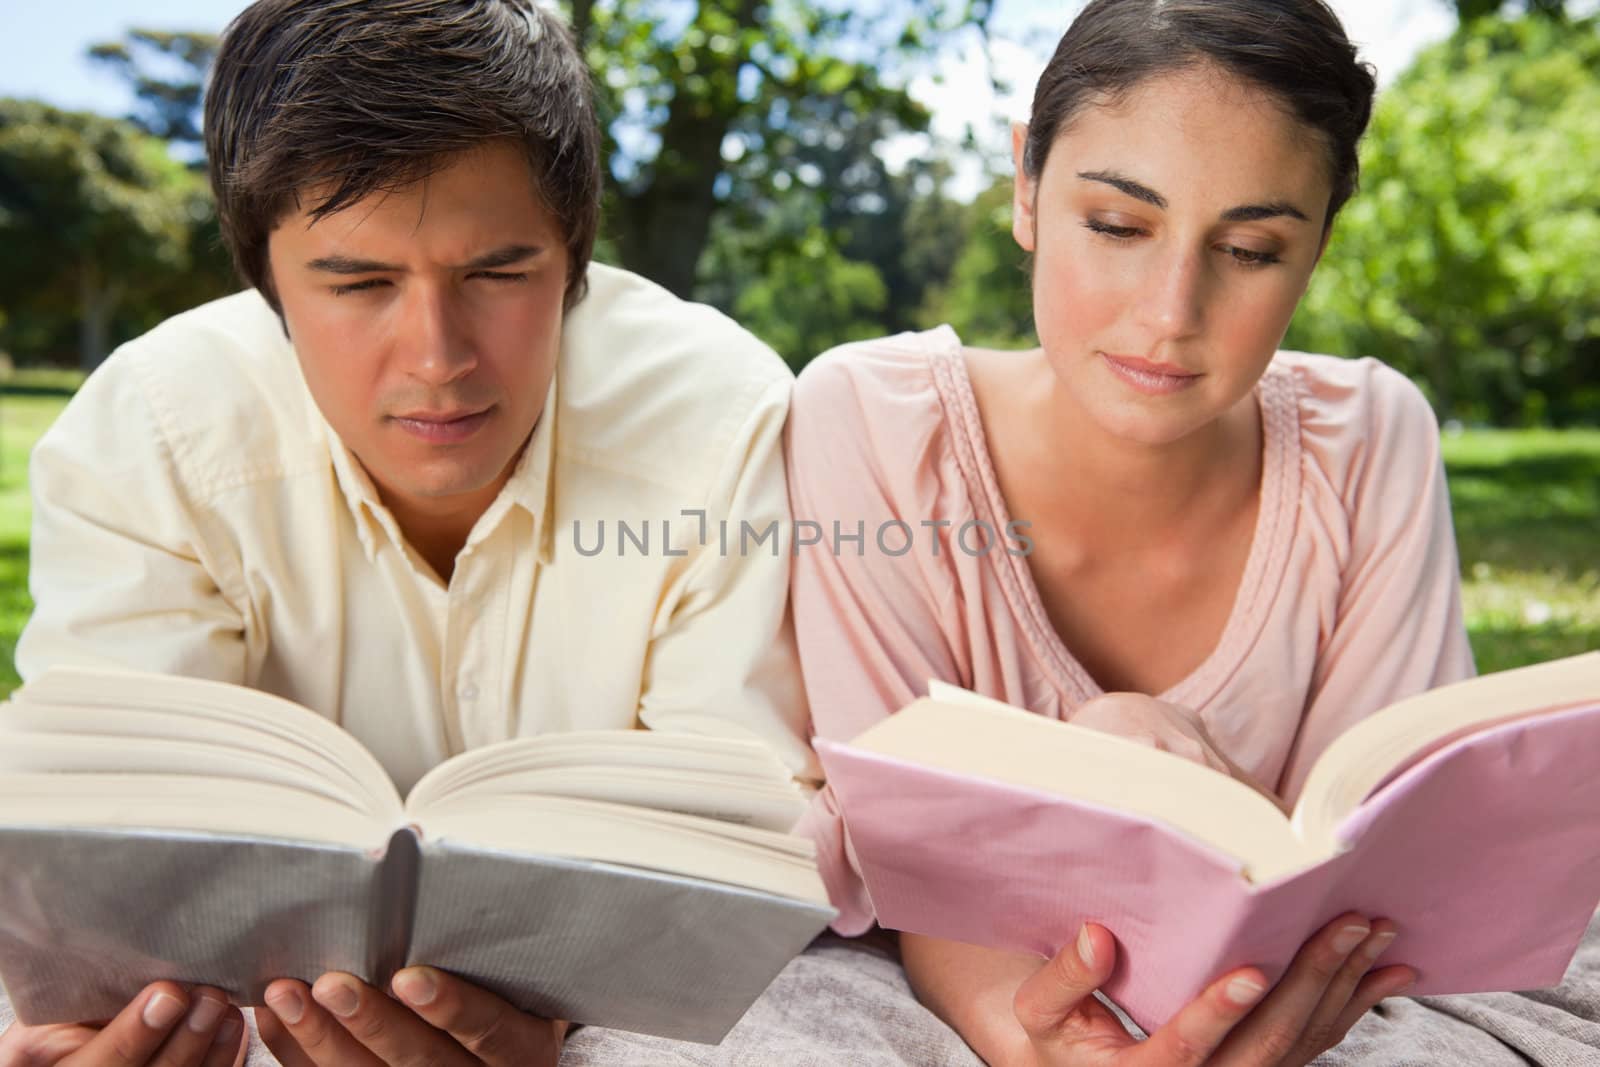 Man and a woman with a serious expression while reading books as they lie prone on a blanket in the grass